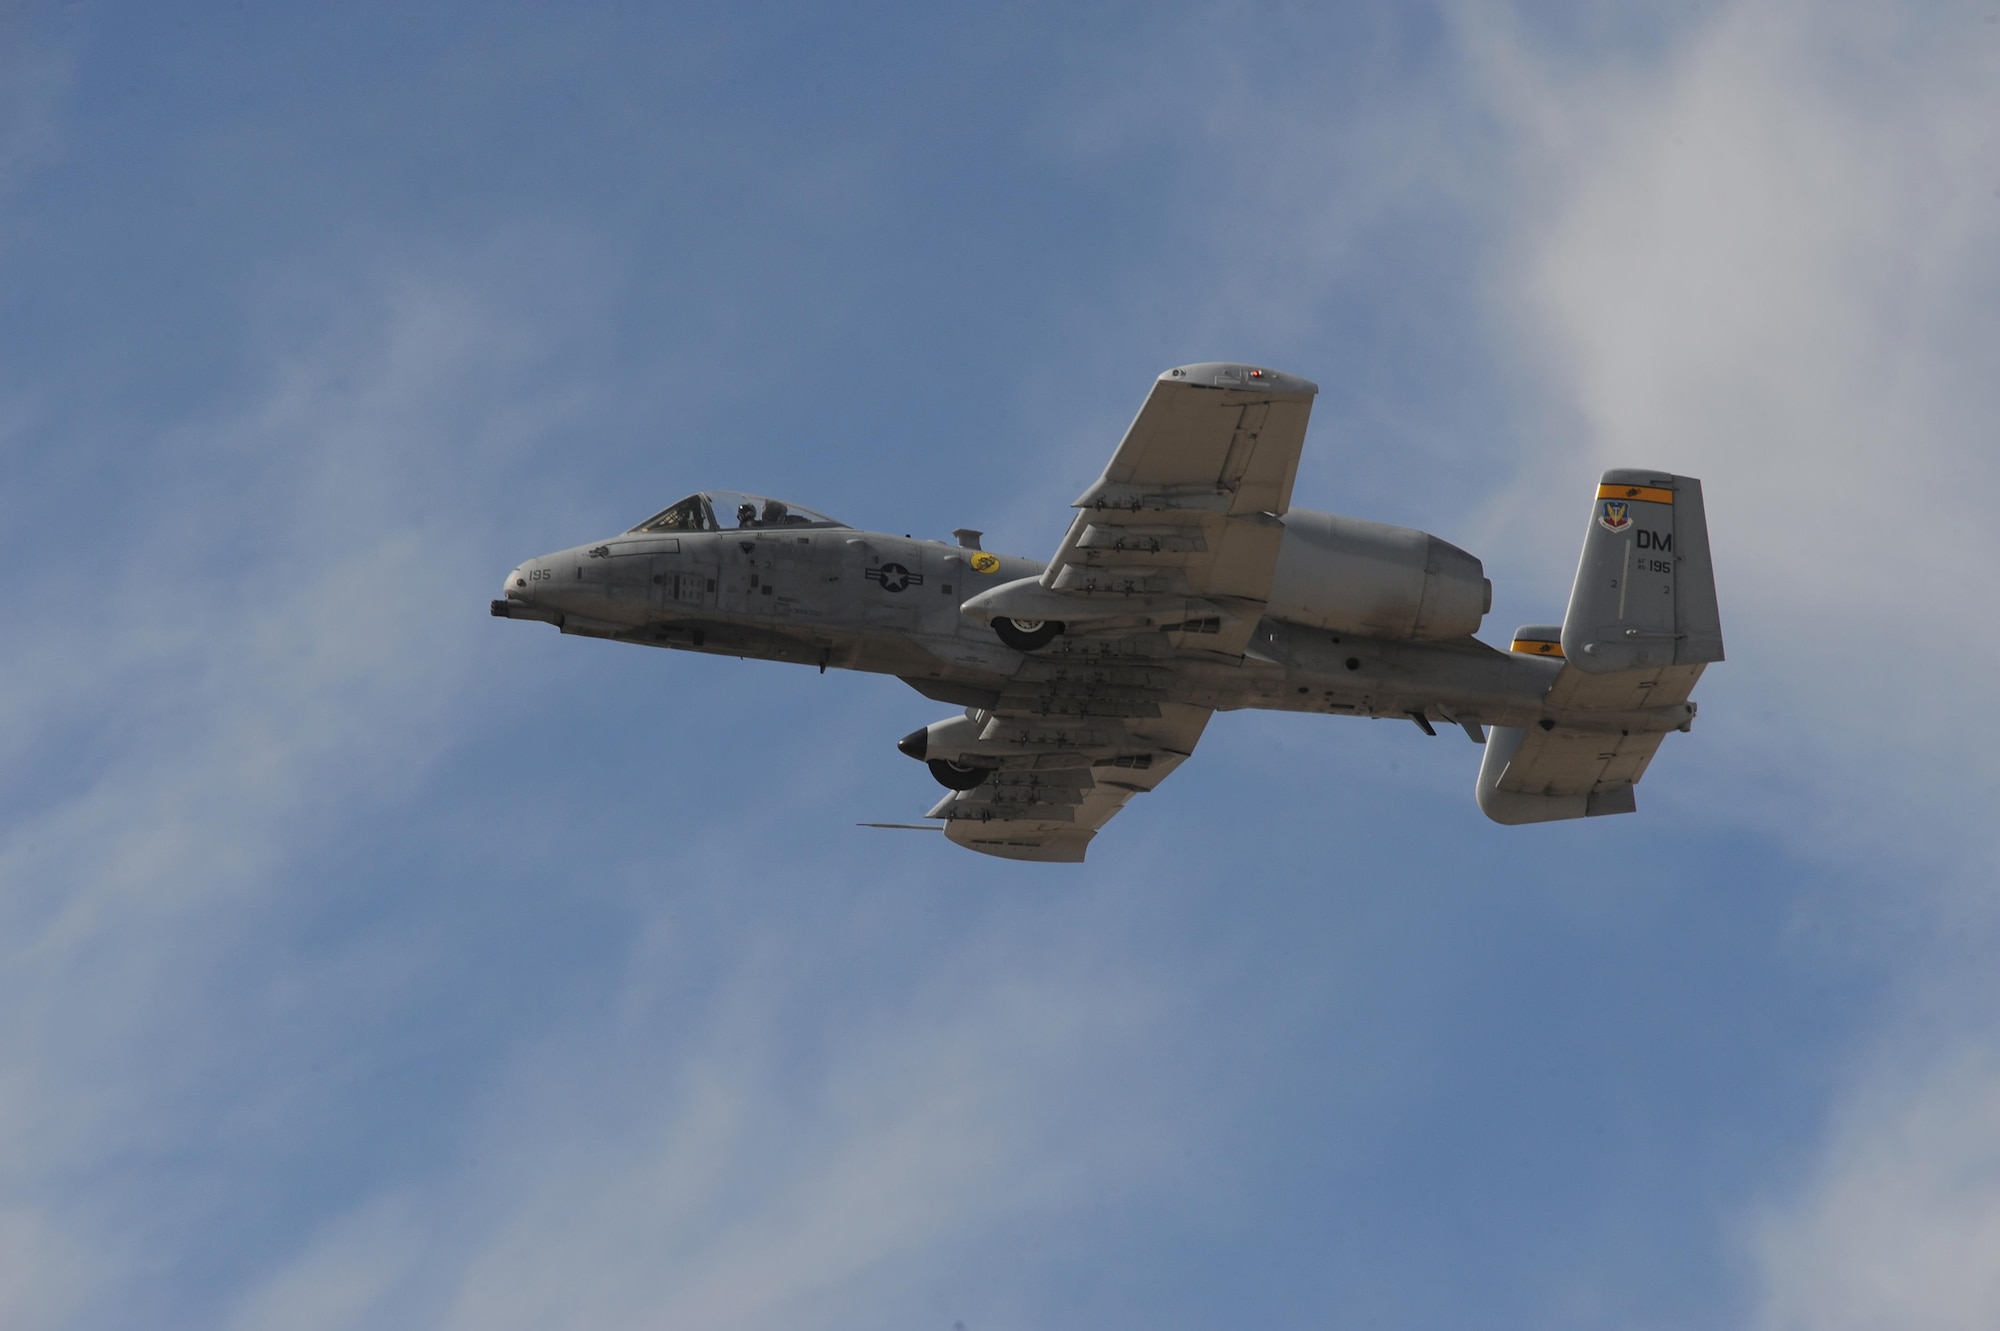 A U.S. Air Force A-10C Thunderbolt II flies above spectators during the 2017 Heritage Flight Training and Certification Course at Davis-Monthan Air Force Base, Ariz., Feb. 11, 2017. The modern aircraft that participated in this year's HFTCC were the F-35 Lightning II, the F-22 Raptor, F-16 Fighting Falcon and the A-10C Thunderbolt II. The historic aircraft included the P-51 and T-51 Mustangs, the P-40 Warhawk, the P-38 Lightning, the P-47 Thunderbolt, the T-33 Shooting Star and the F-86 Sabre. (U.S. Air Force photo by Senior Airman Ashley N. Steffen)